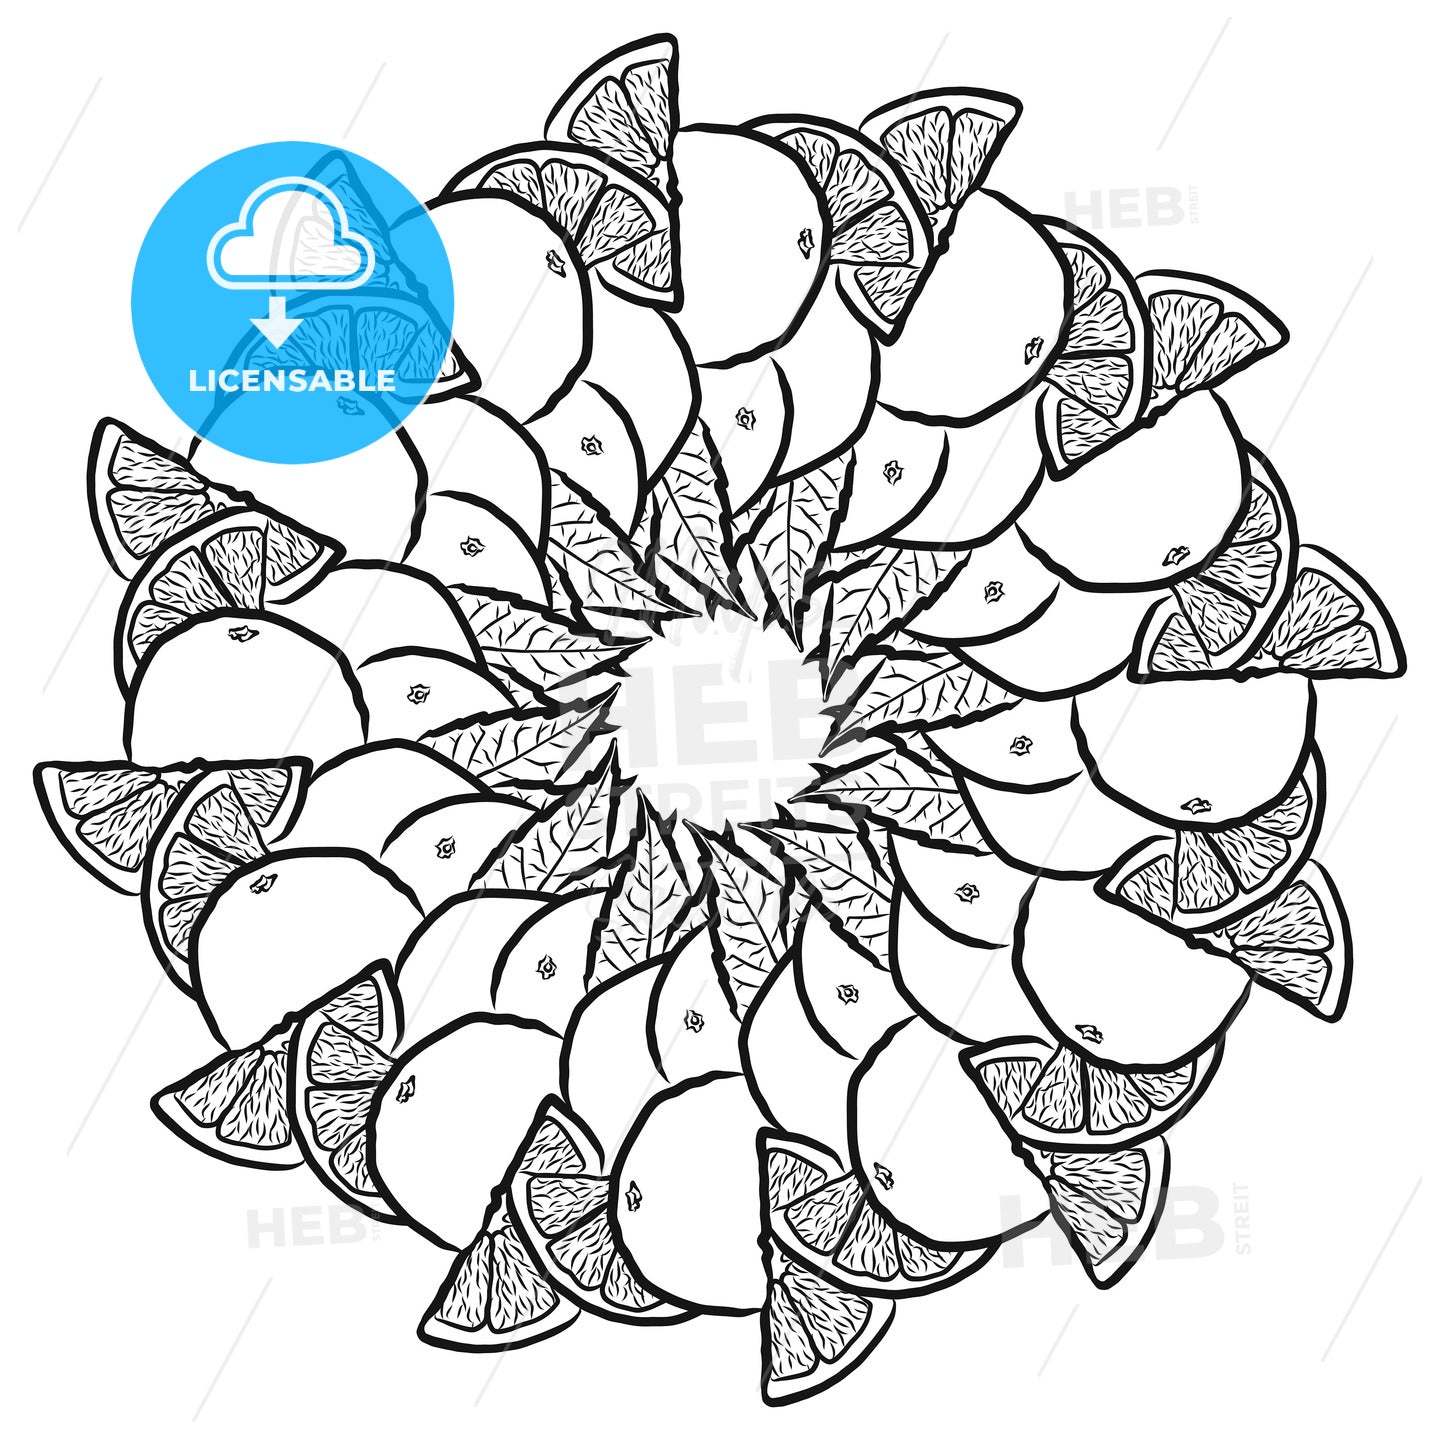 Outline sketch of oranges arranged in a circle – instant download